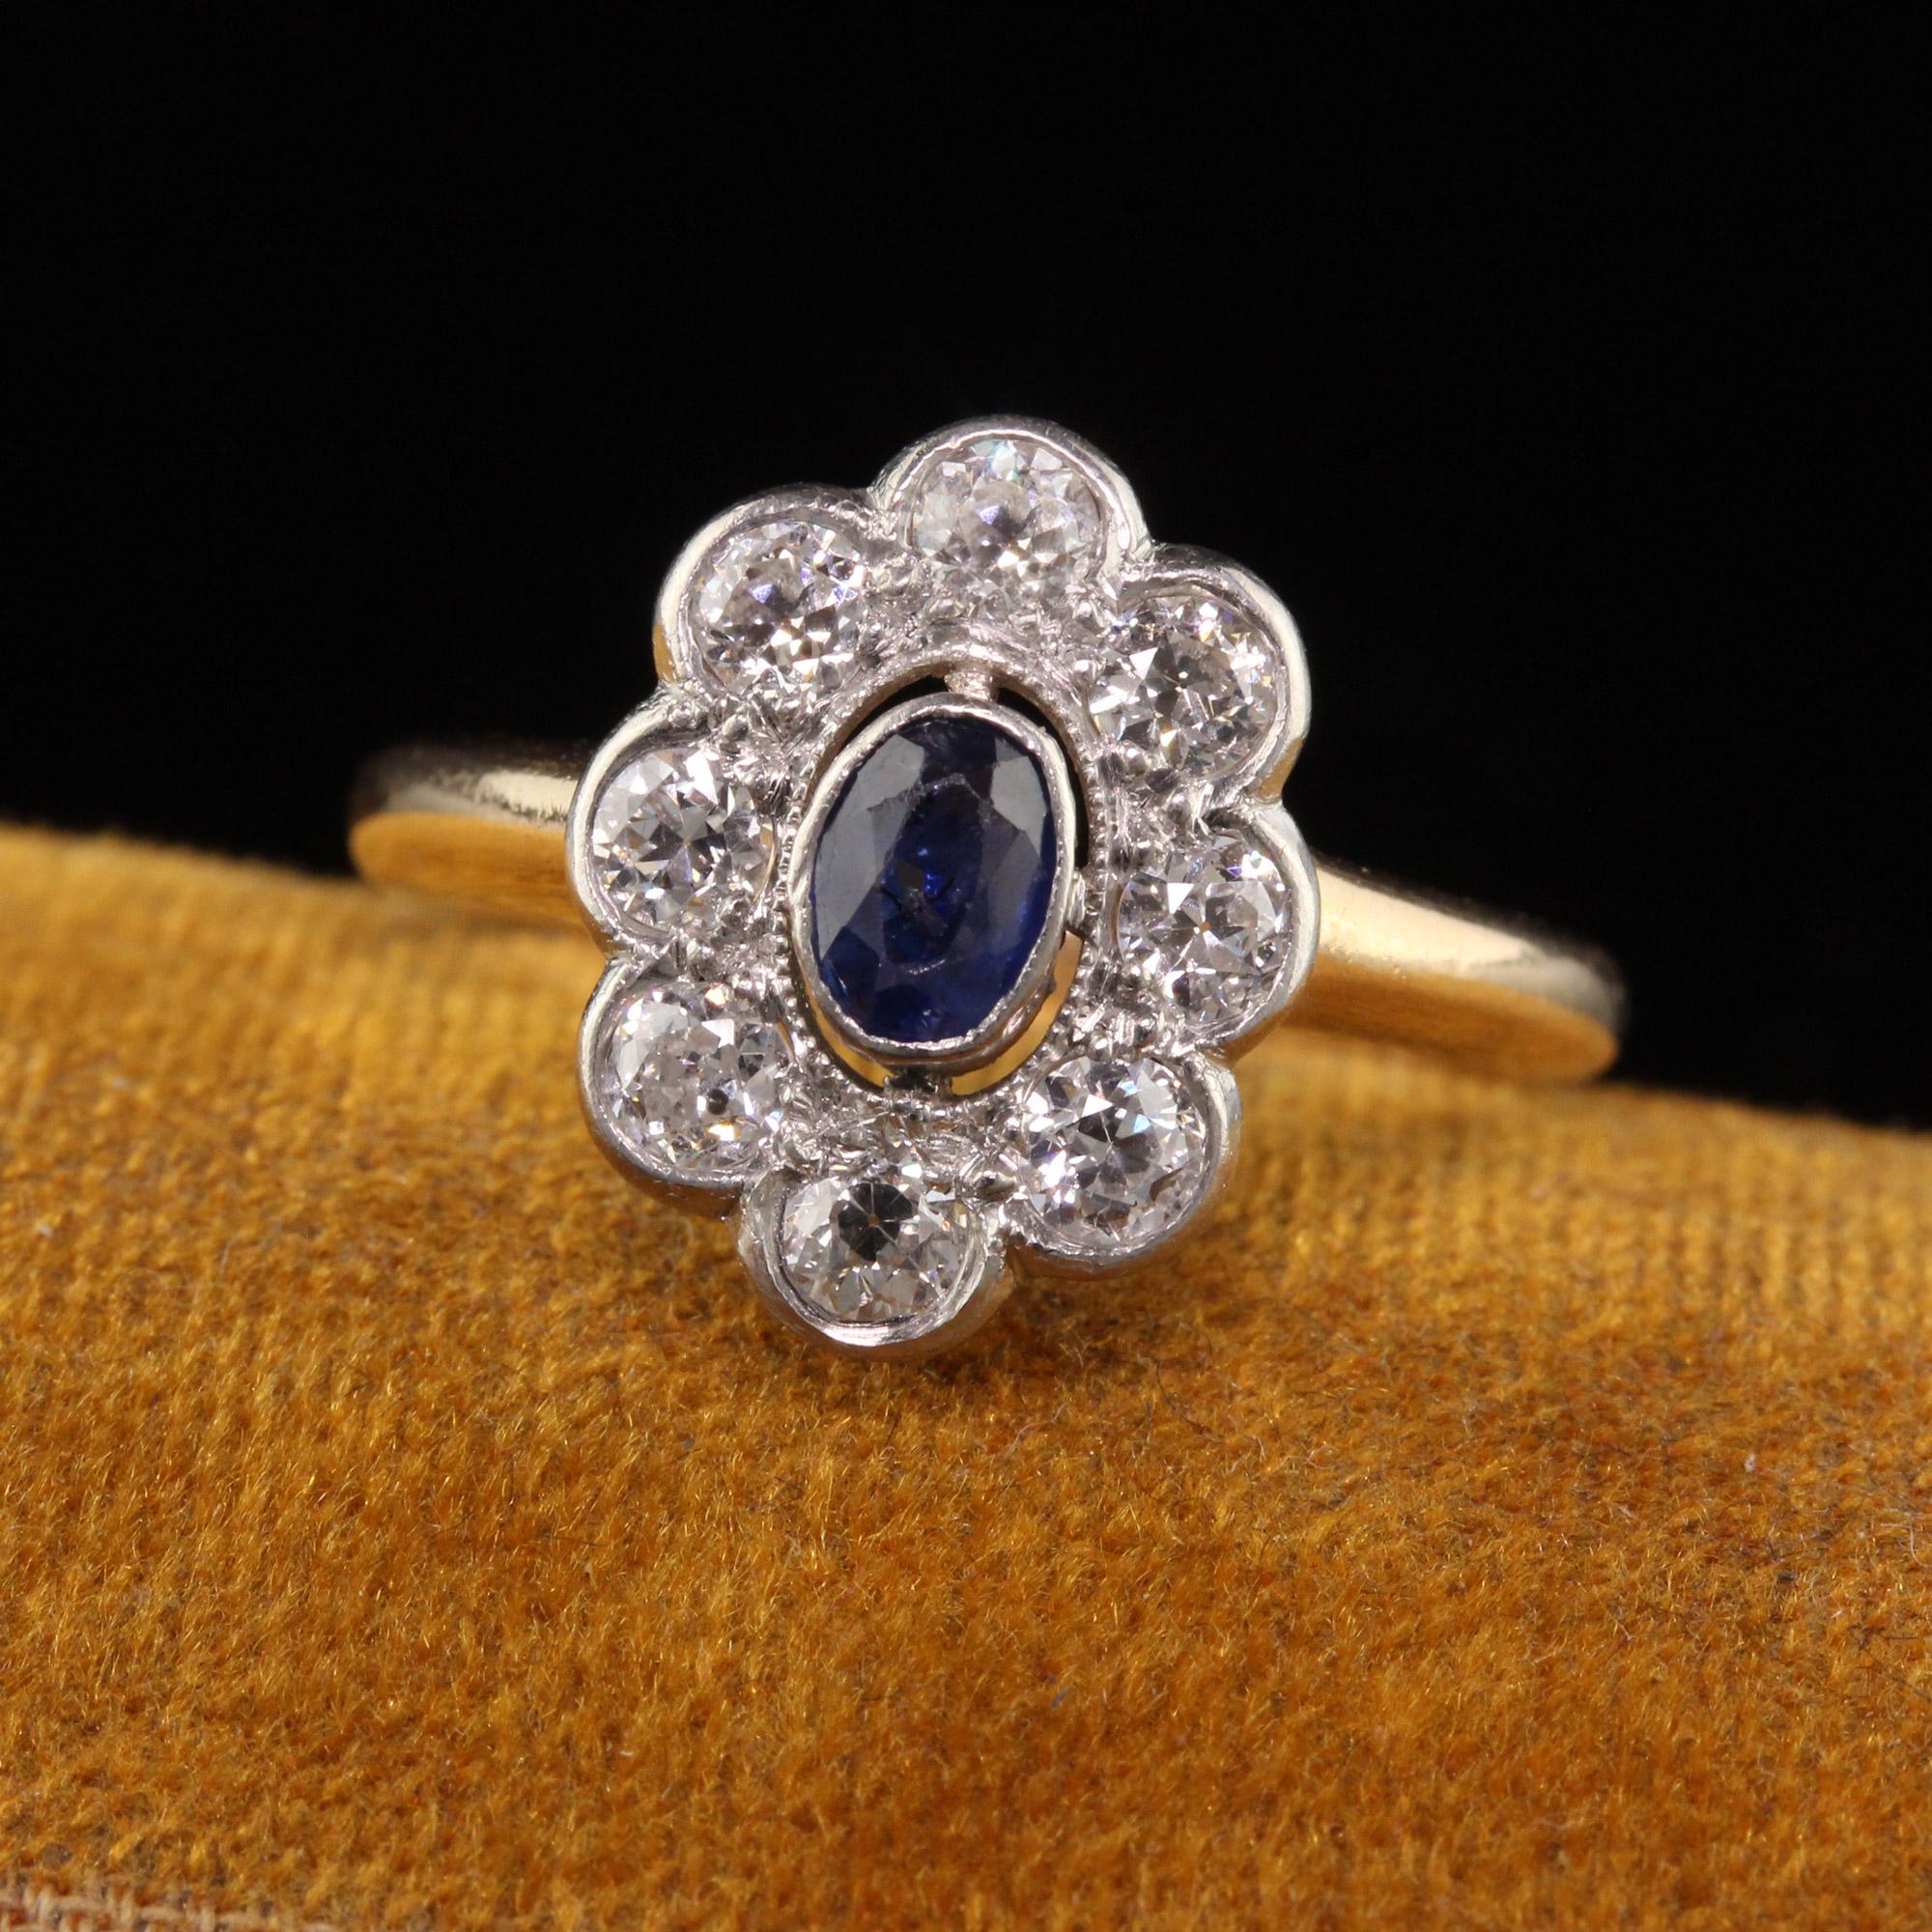 Beautiful Antique Art Deco 14K Yellow Gold and Platinum Old Euro Diamond and Sapphire Ring. This gorgeous ring is crafted in 14k yellow gold and platinum top. There are 8 white old european cut diamonds surrounding a natural oval sapphire. The ring